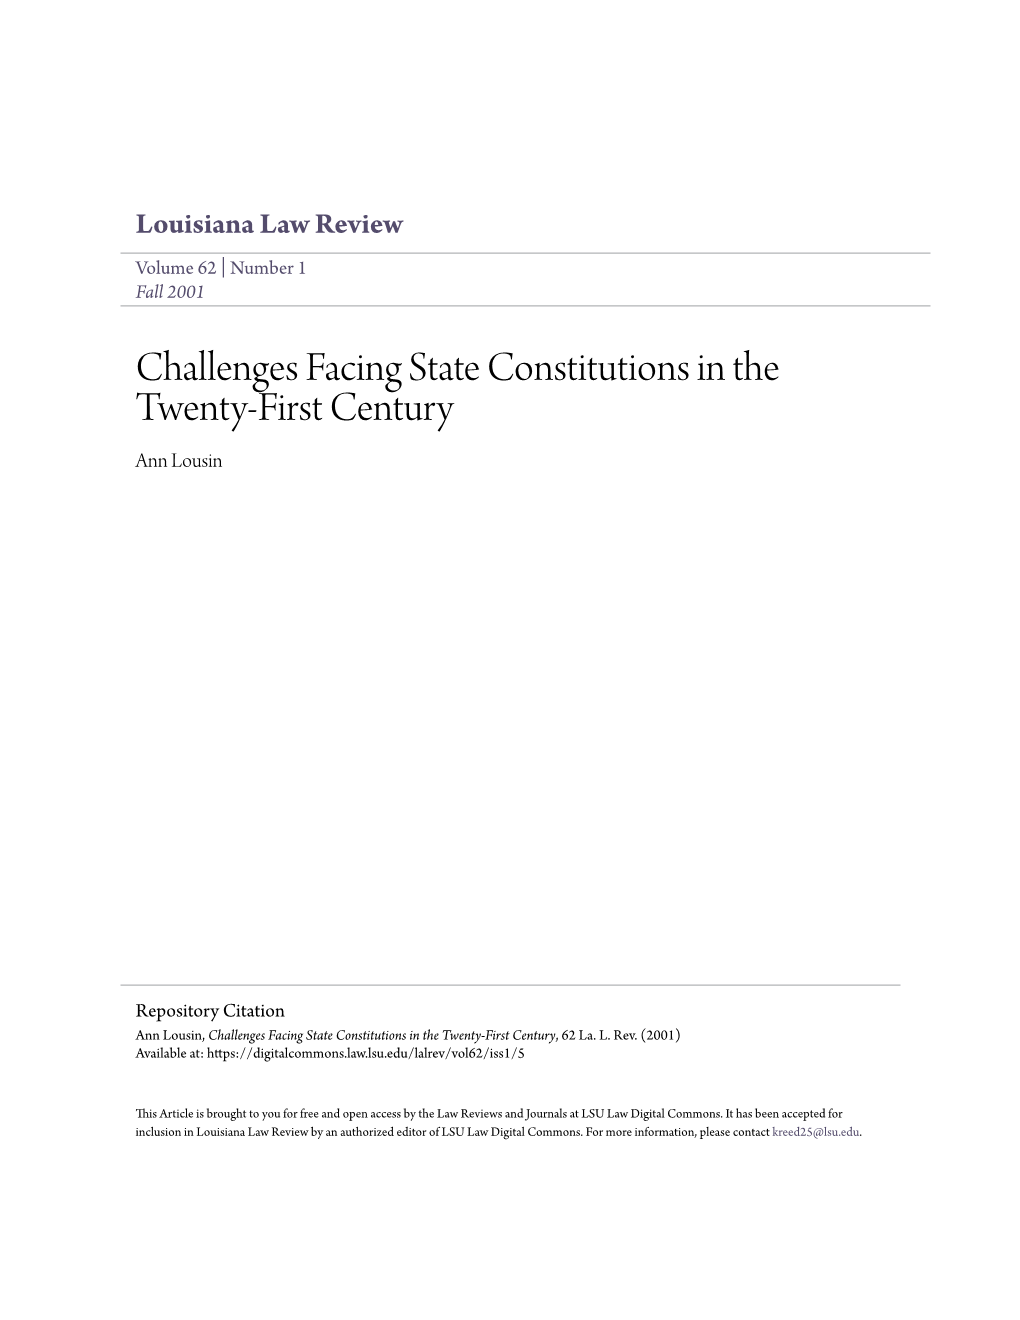 Challenges Facing State Constitutions in the Twenty-First Century Ann Lousin